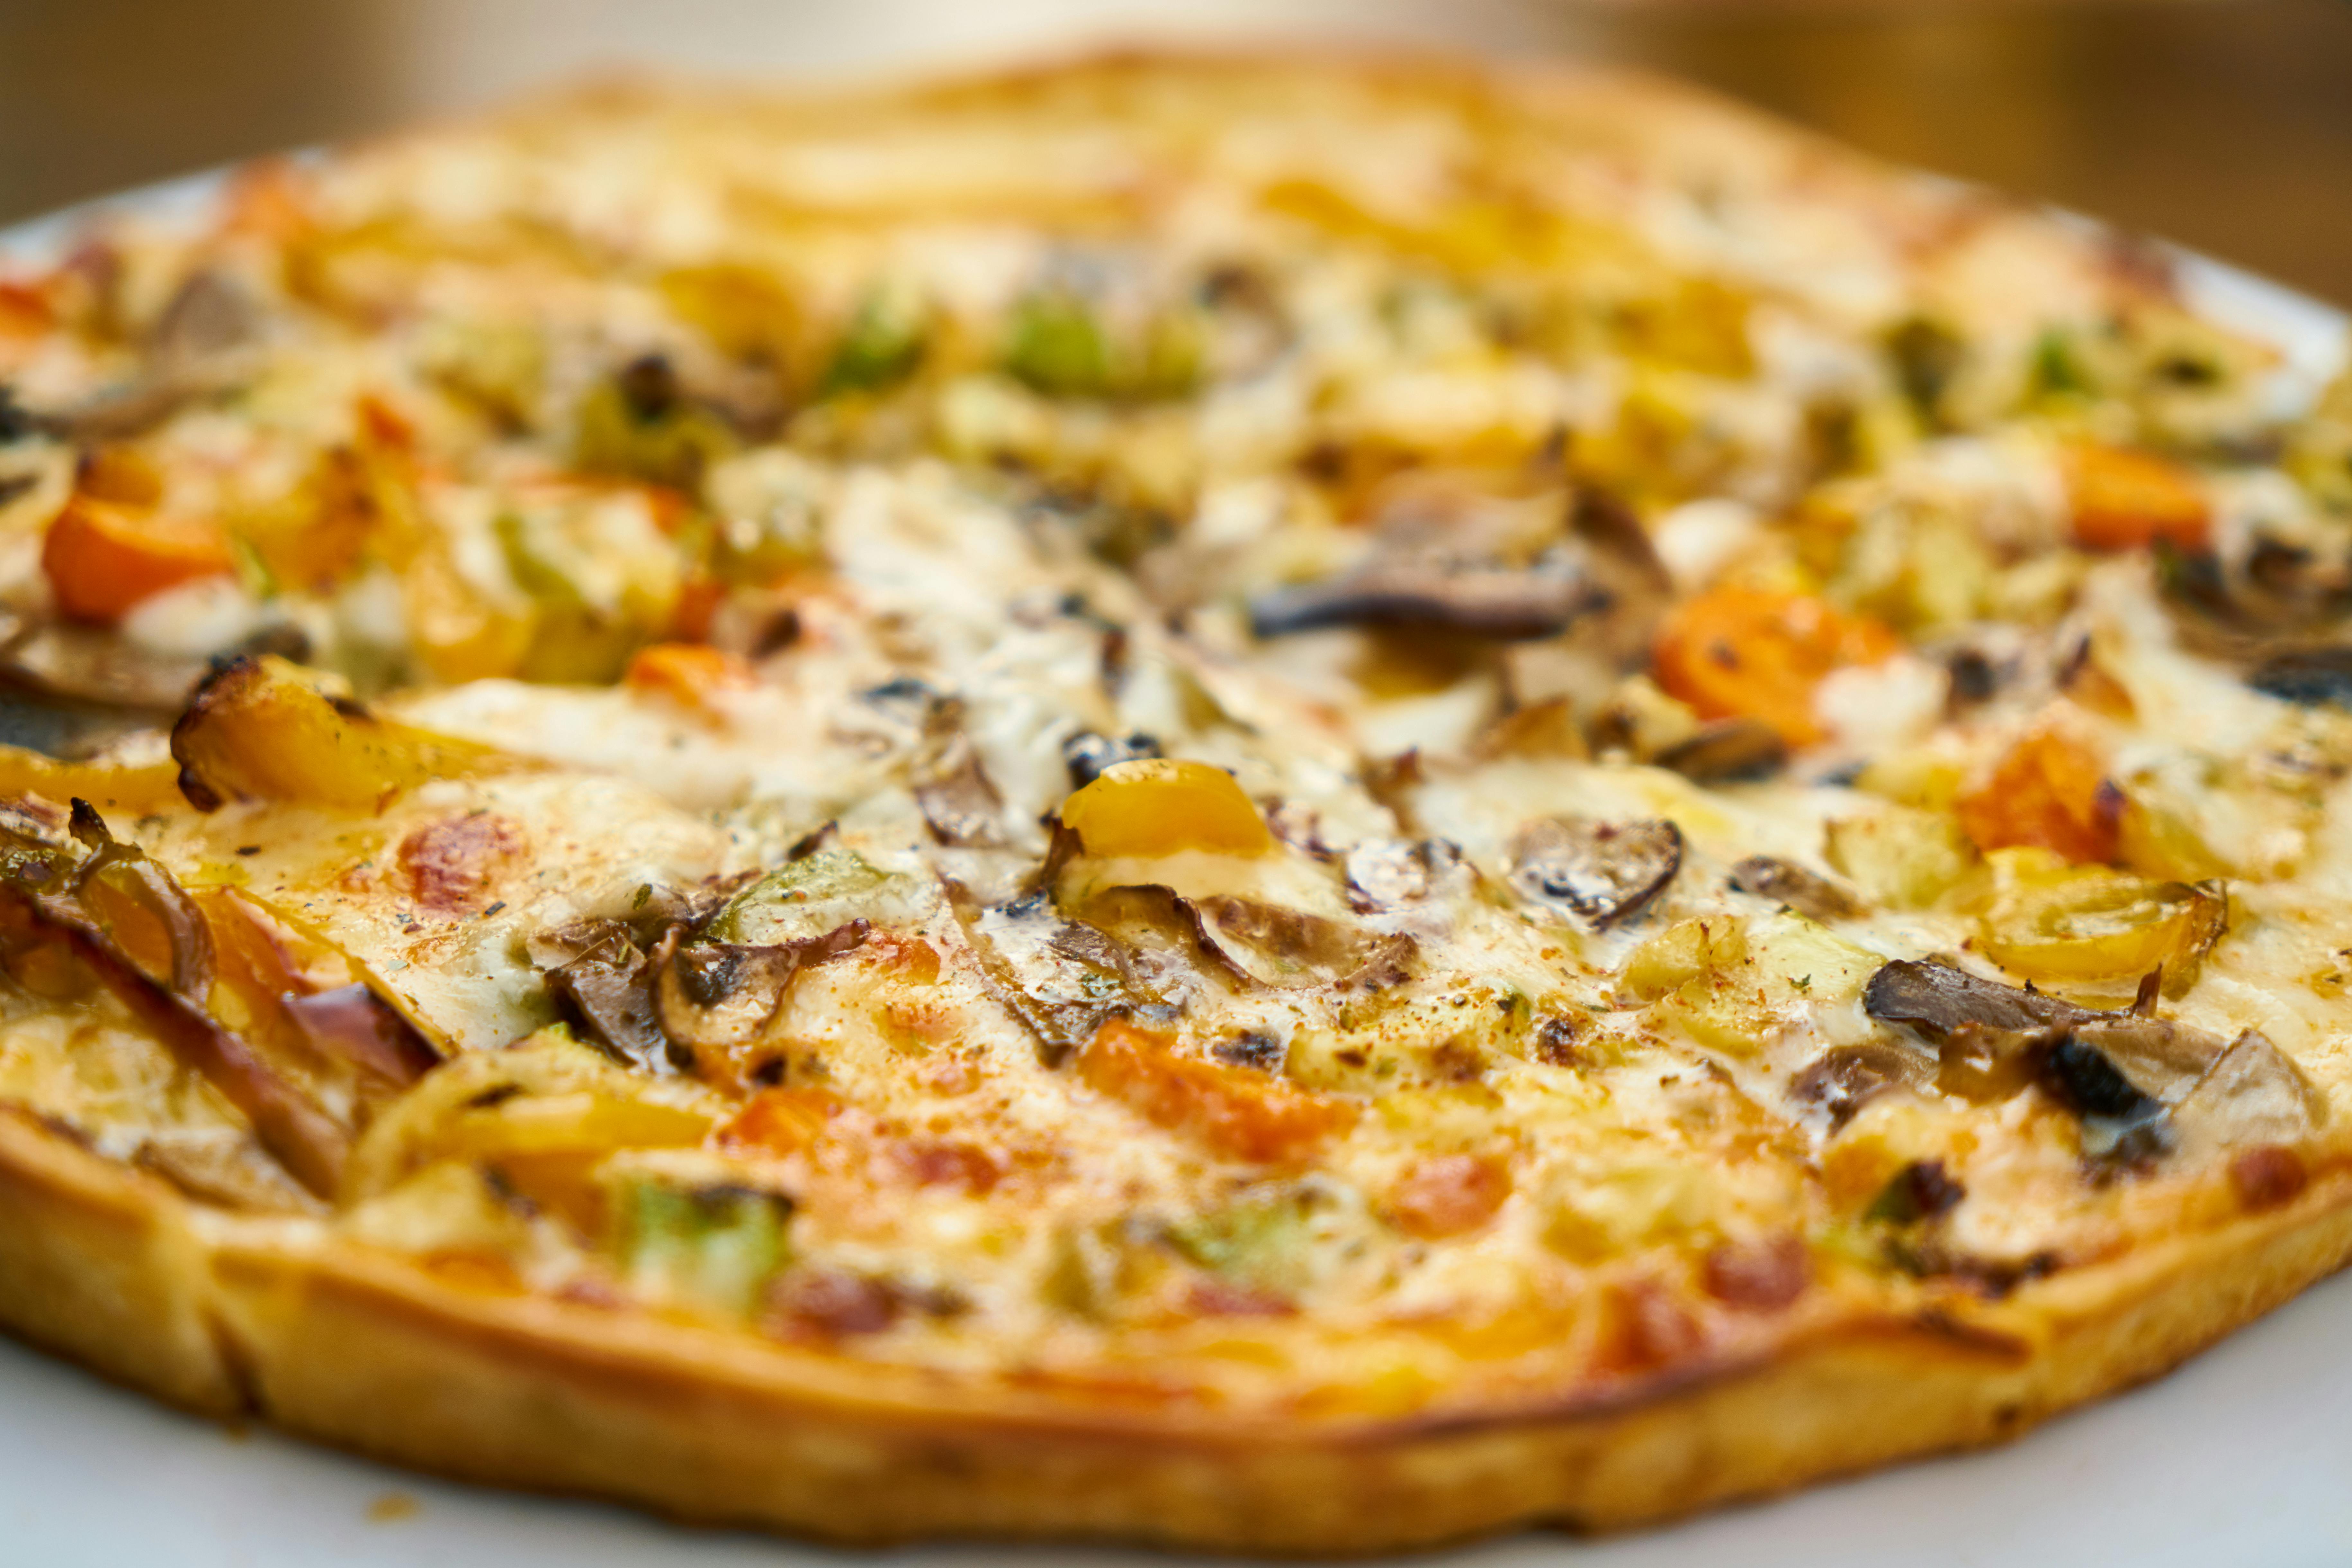  Food  Photography  of Pizza   Free Stock Photo 